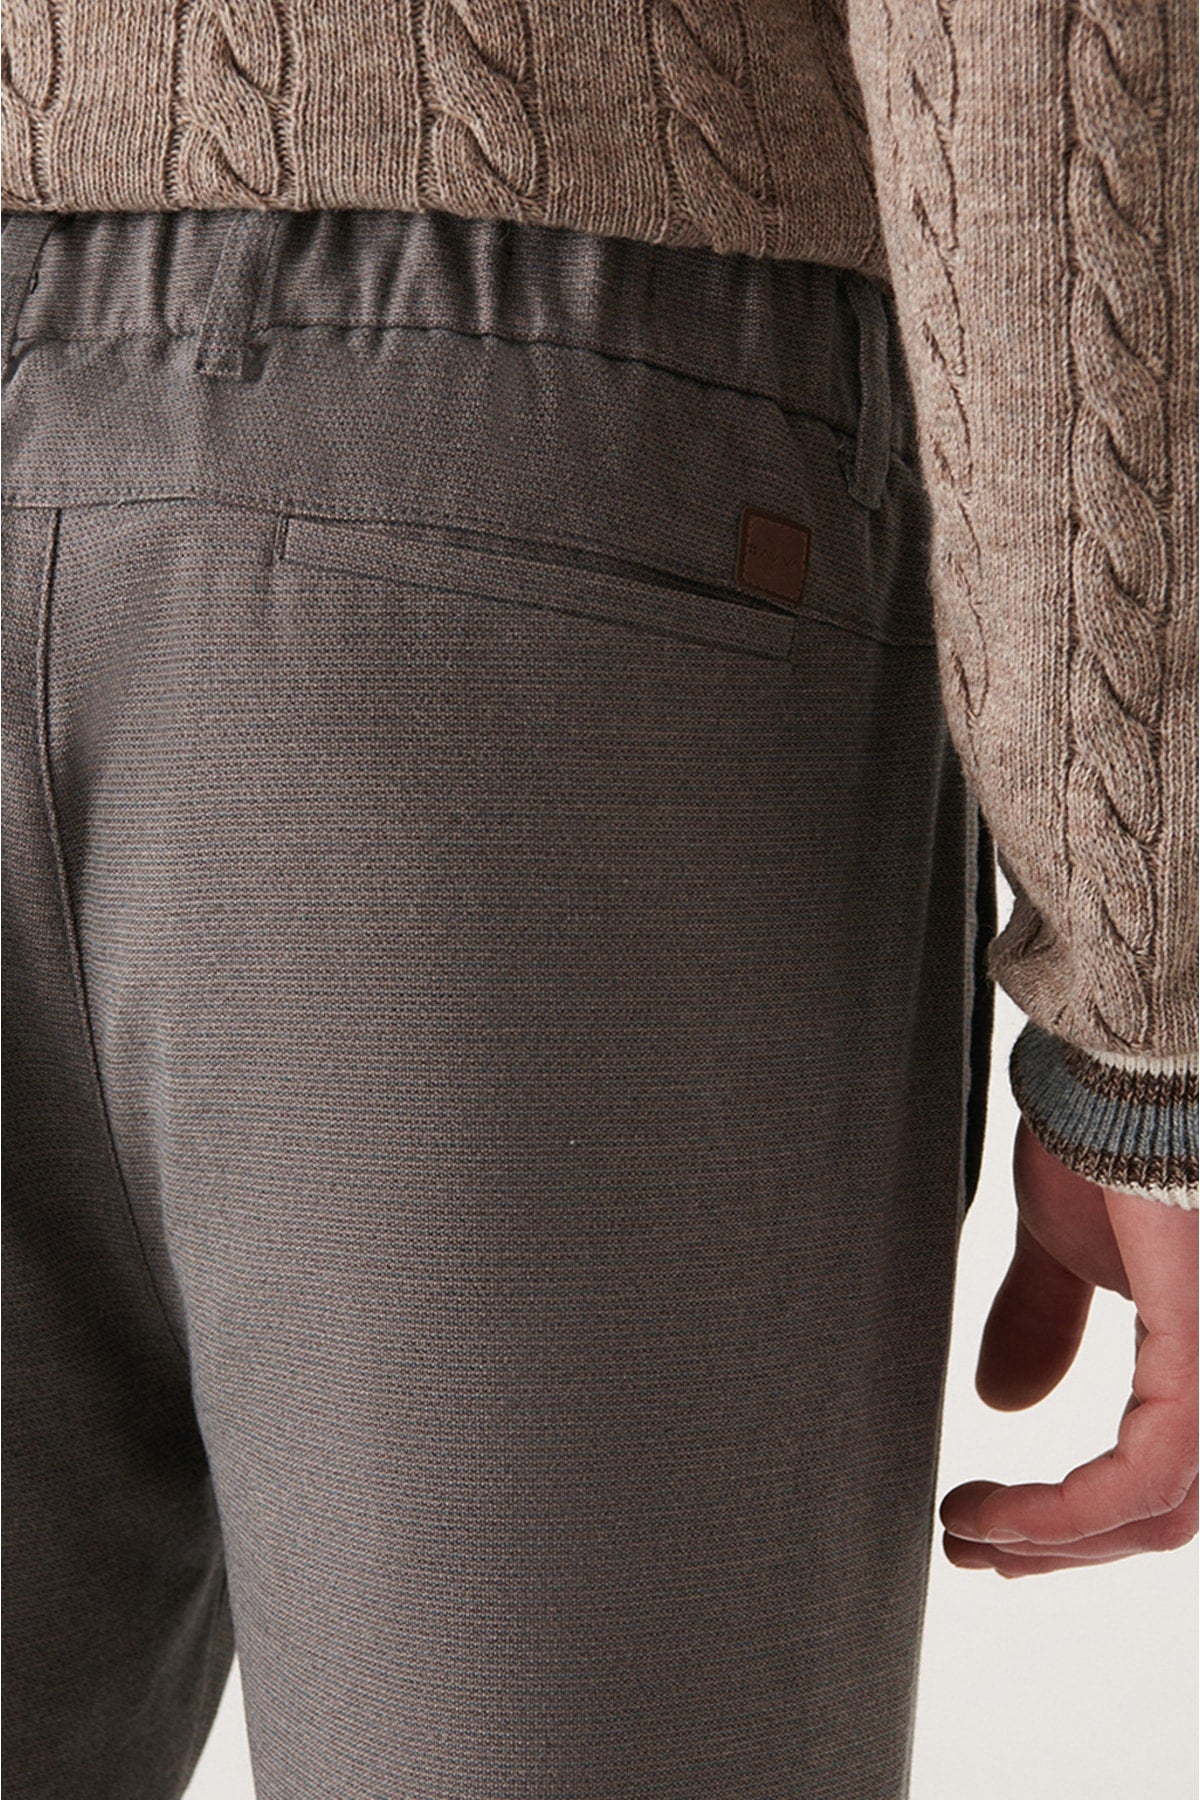 Men's Gray Waist Relaxed Fit Chino Pants A22y3036